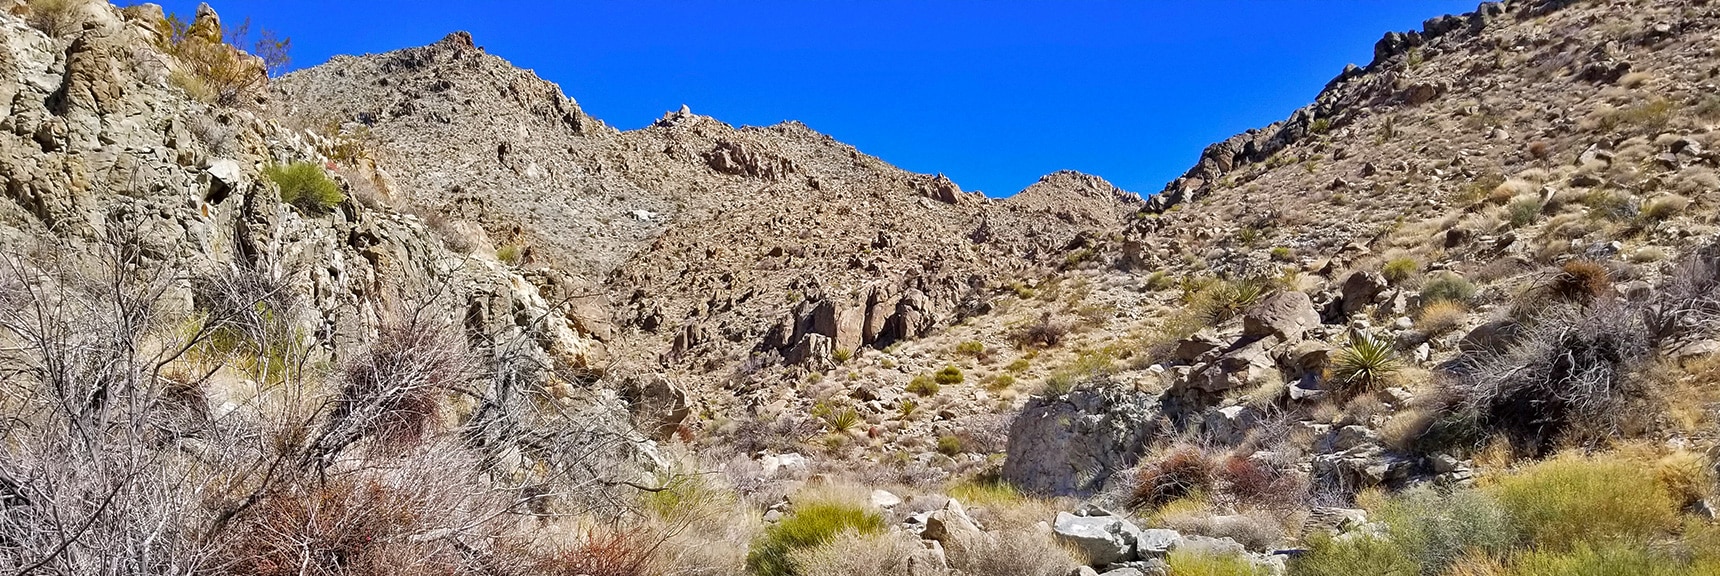 Mt. Wilson and Summit Approach Ridge from Upper Horse Thief Canyon | Horse Thief Canyon Loop | Mt. Wilson | Black Mountains | Lake Mead National Recreation Area, Arizona